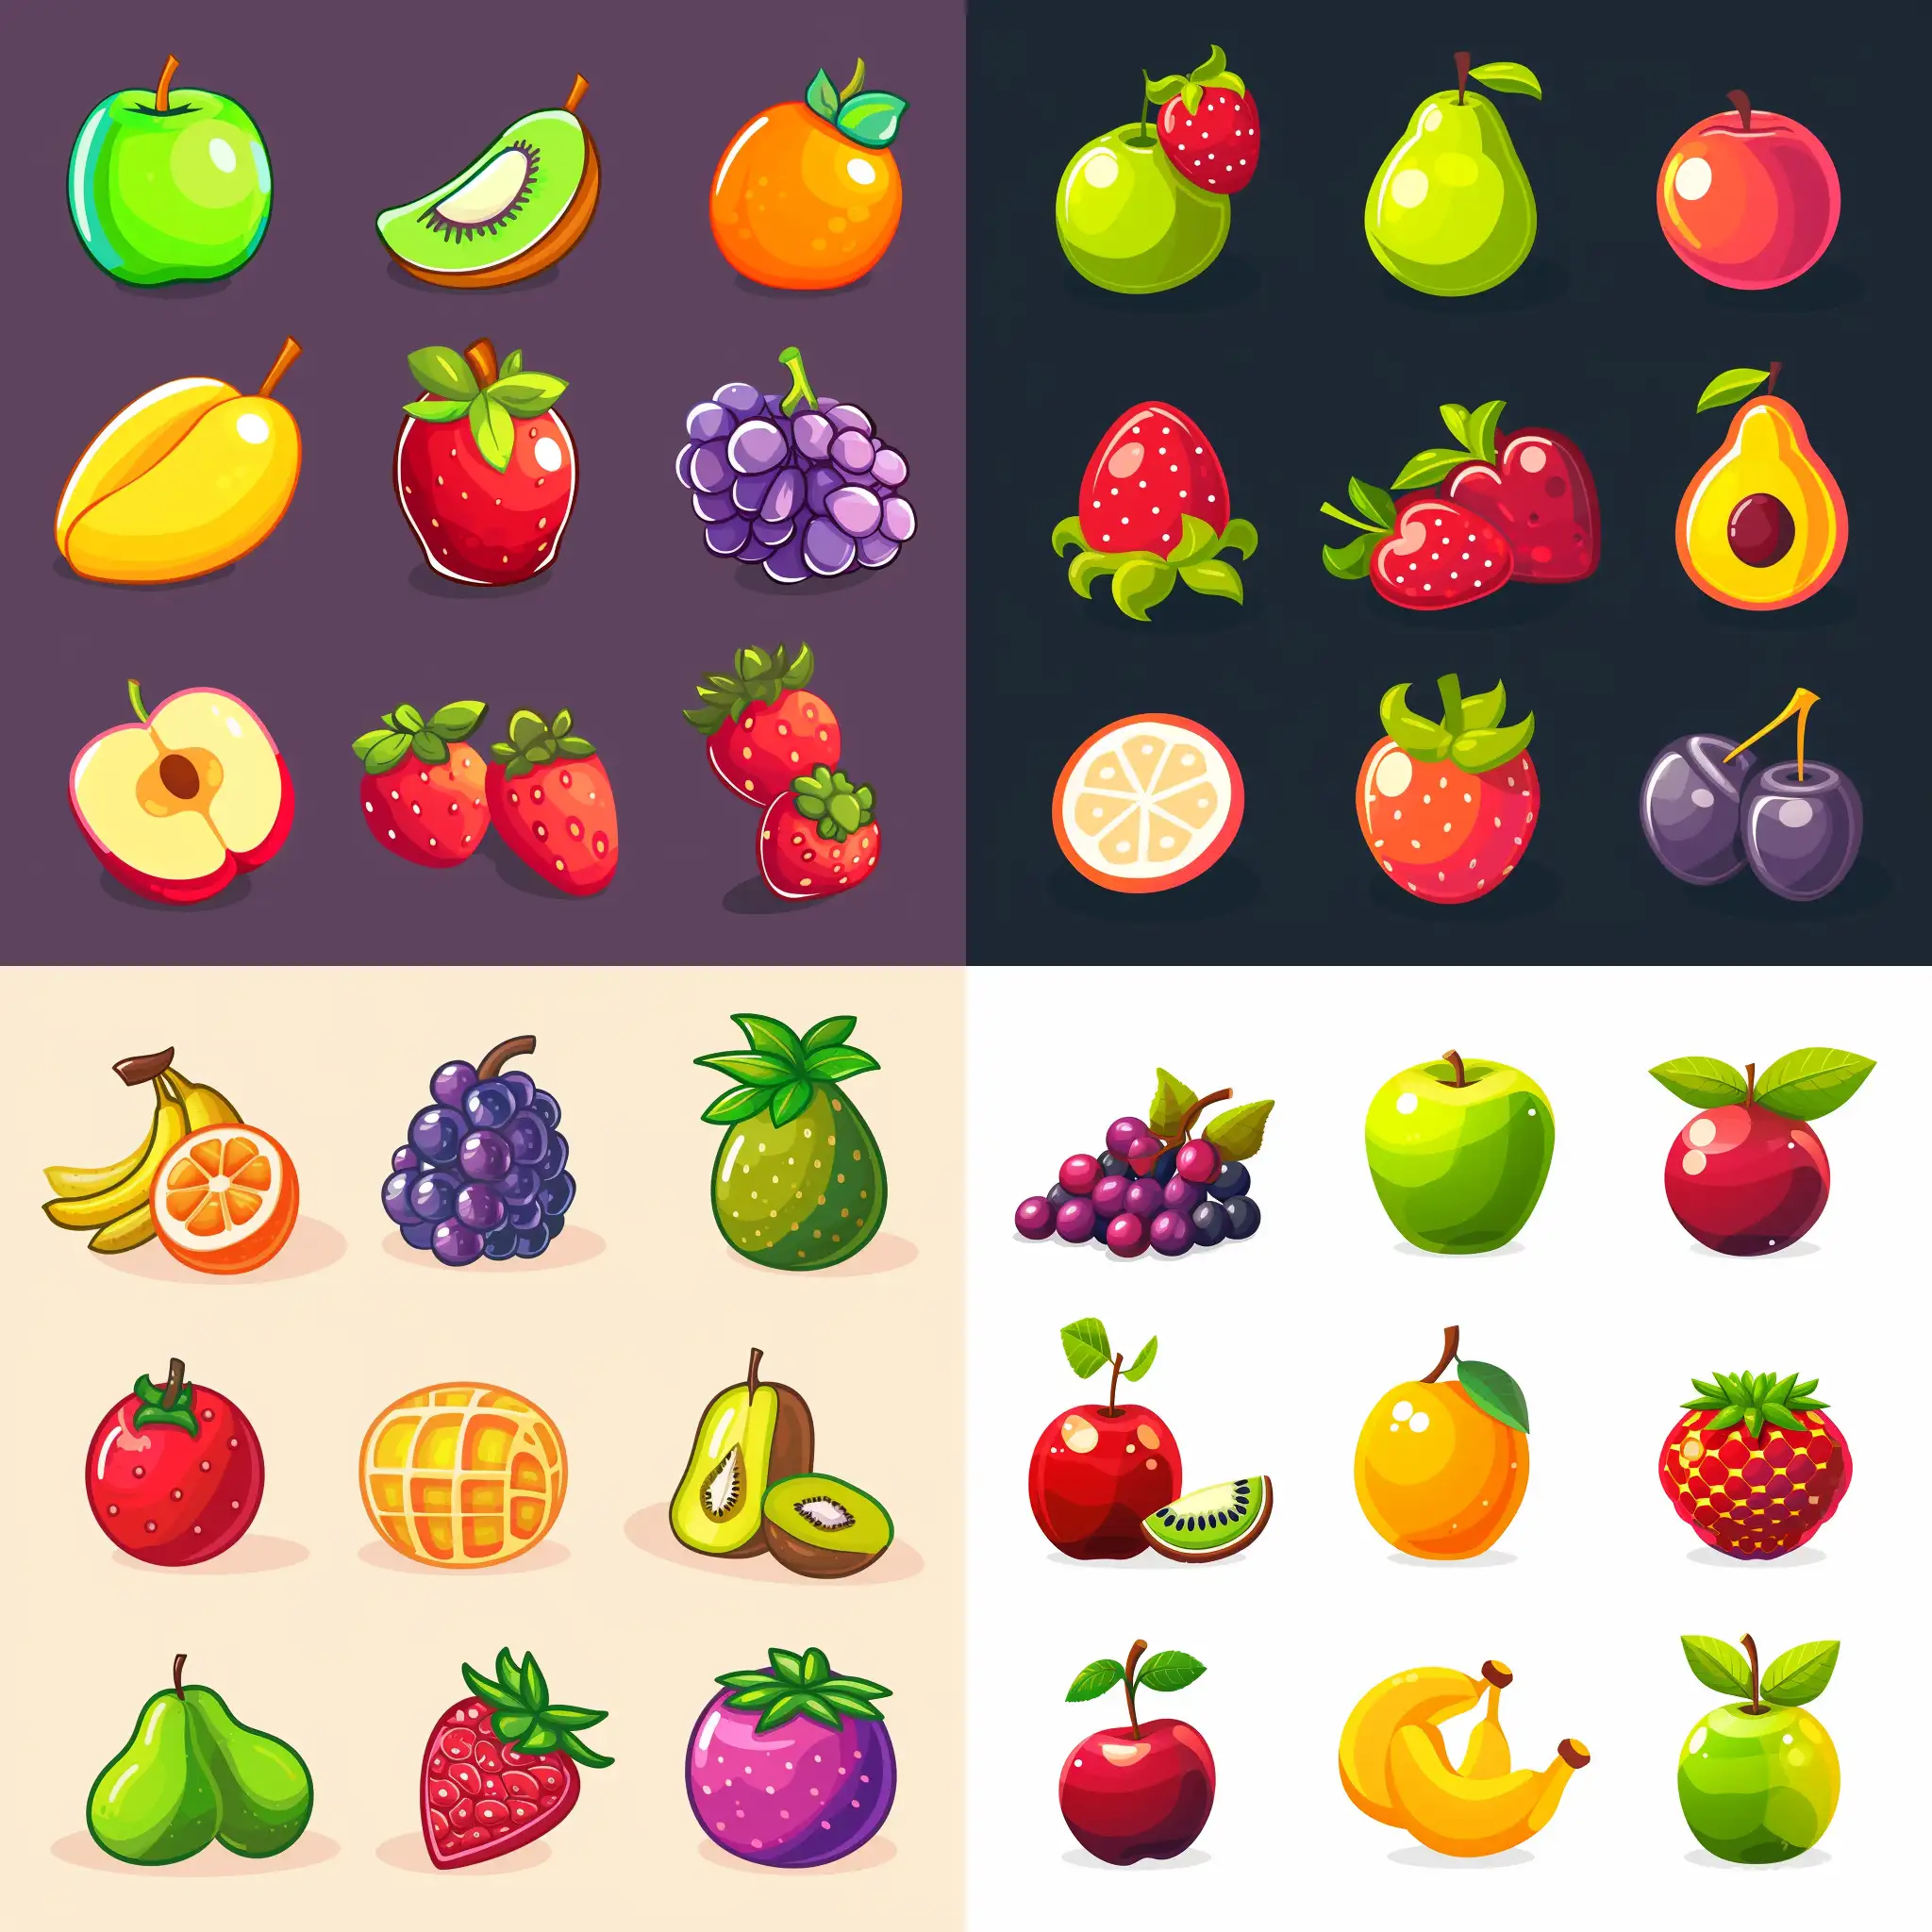 Colorful-Fruit-Arranged-in-Casual-Gaming-Style